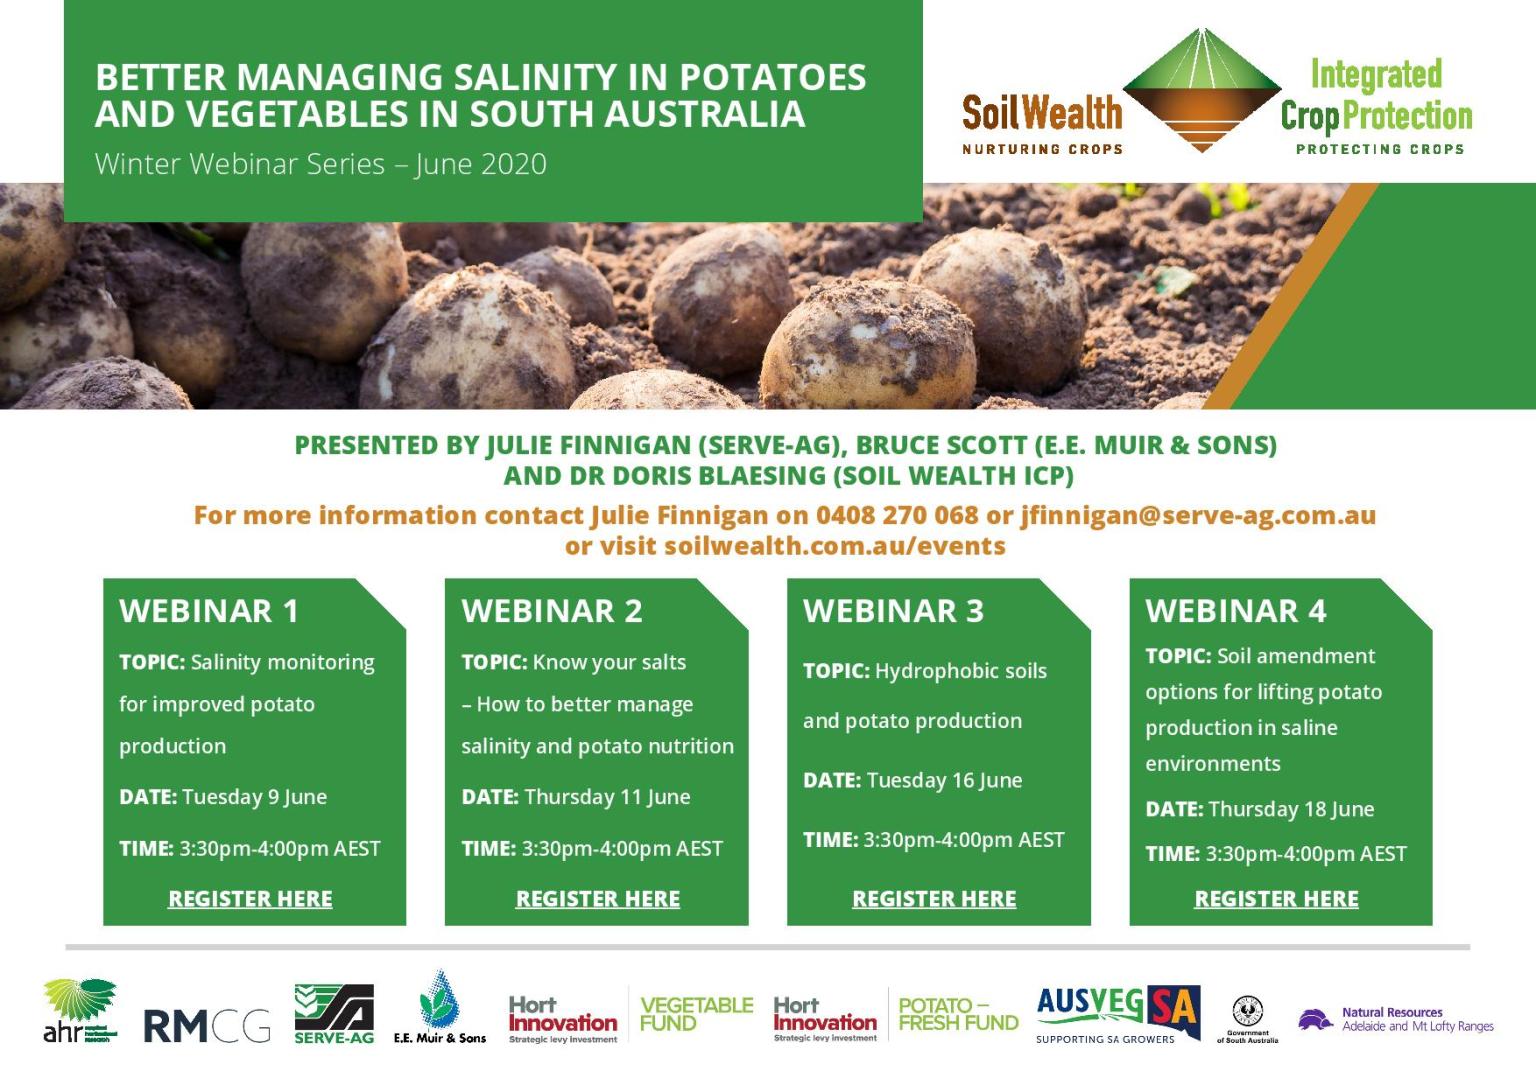 Soil Wealth and Integrated Crop Protection